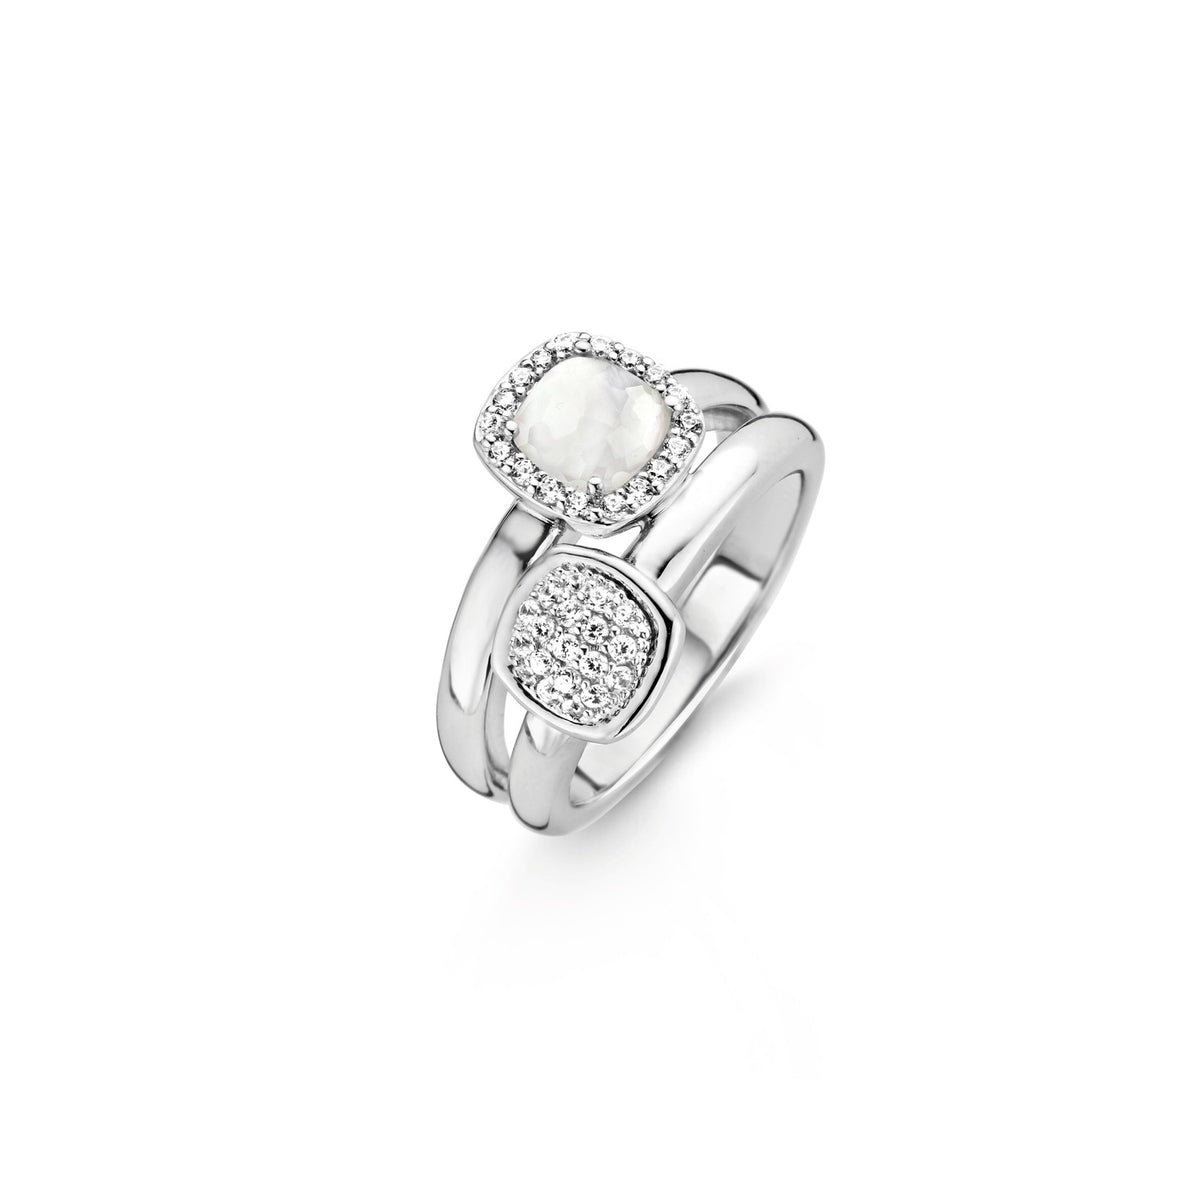 TI SENTO Sterling Silver Ring with Cushion Cubic Zirconia Pave and Mother of Pearl Like Stone with Cubic Zirconia Halo